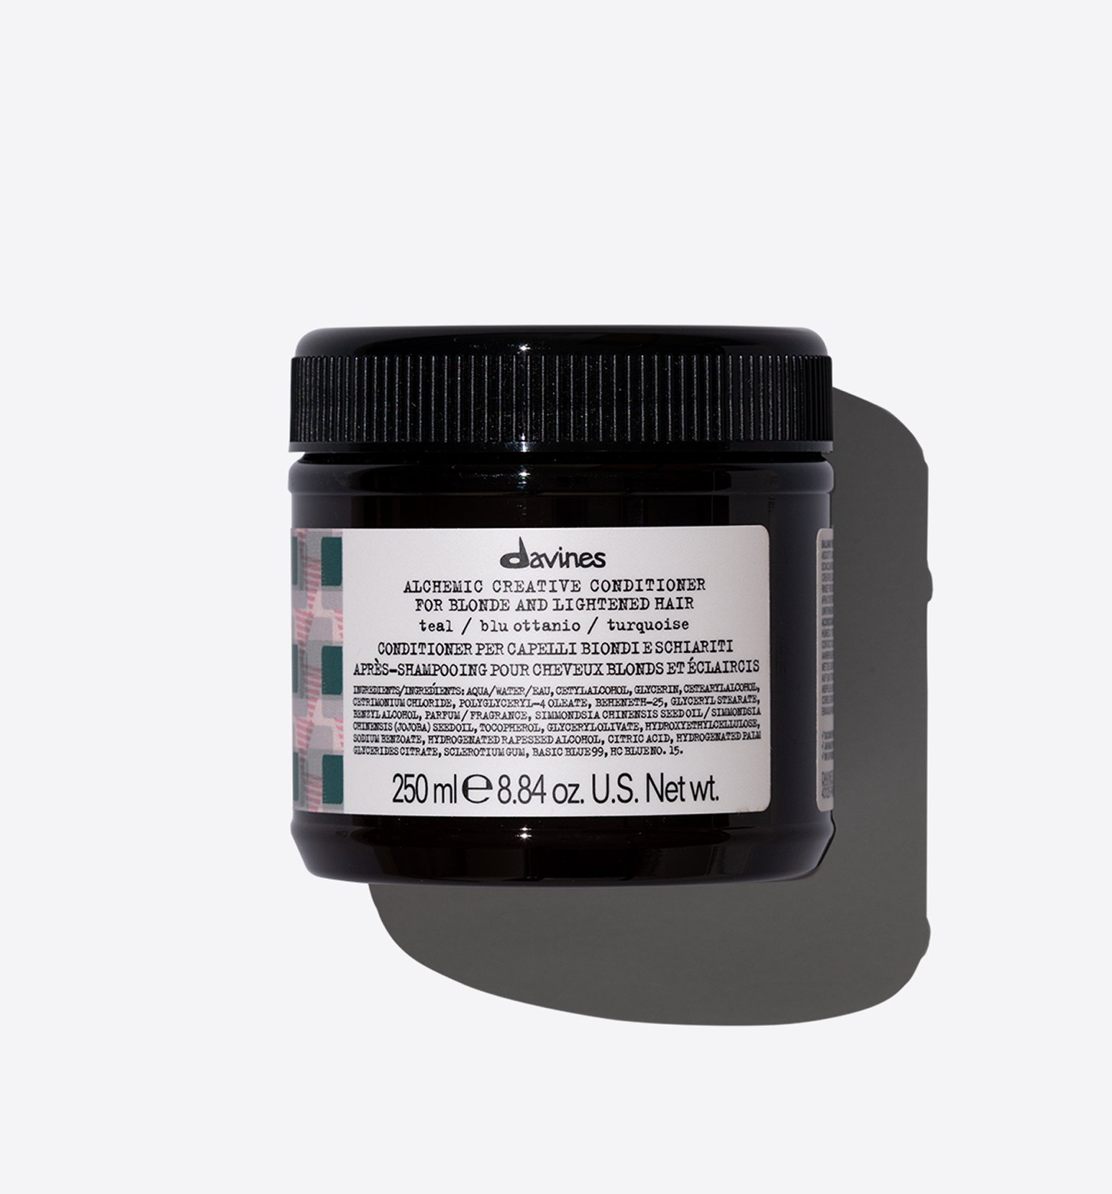 Alchemic Creative Conditioner in Teal - 250ml £22.50